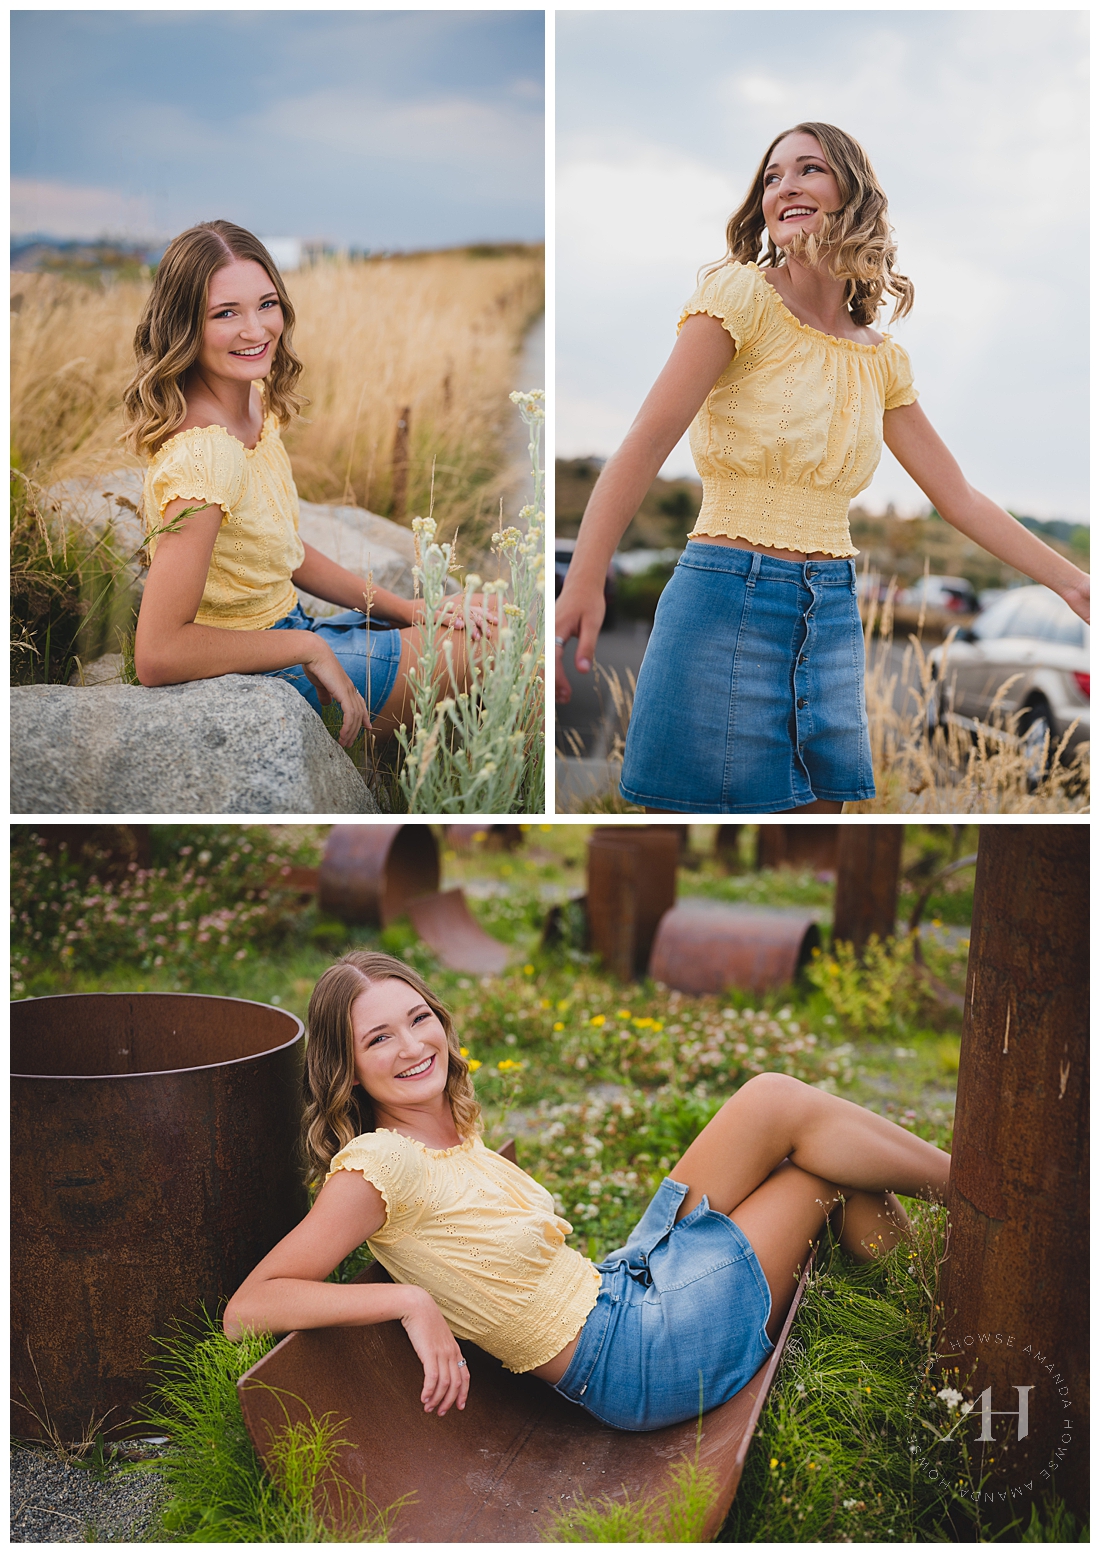 Tips for Cute Poses at Park | Jean Skirt Outfit Ideas, Outdoor Senior Photos | Photographed by the Best Tacoma Senior Photographer Amanda Howse Photography